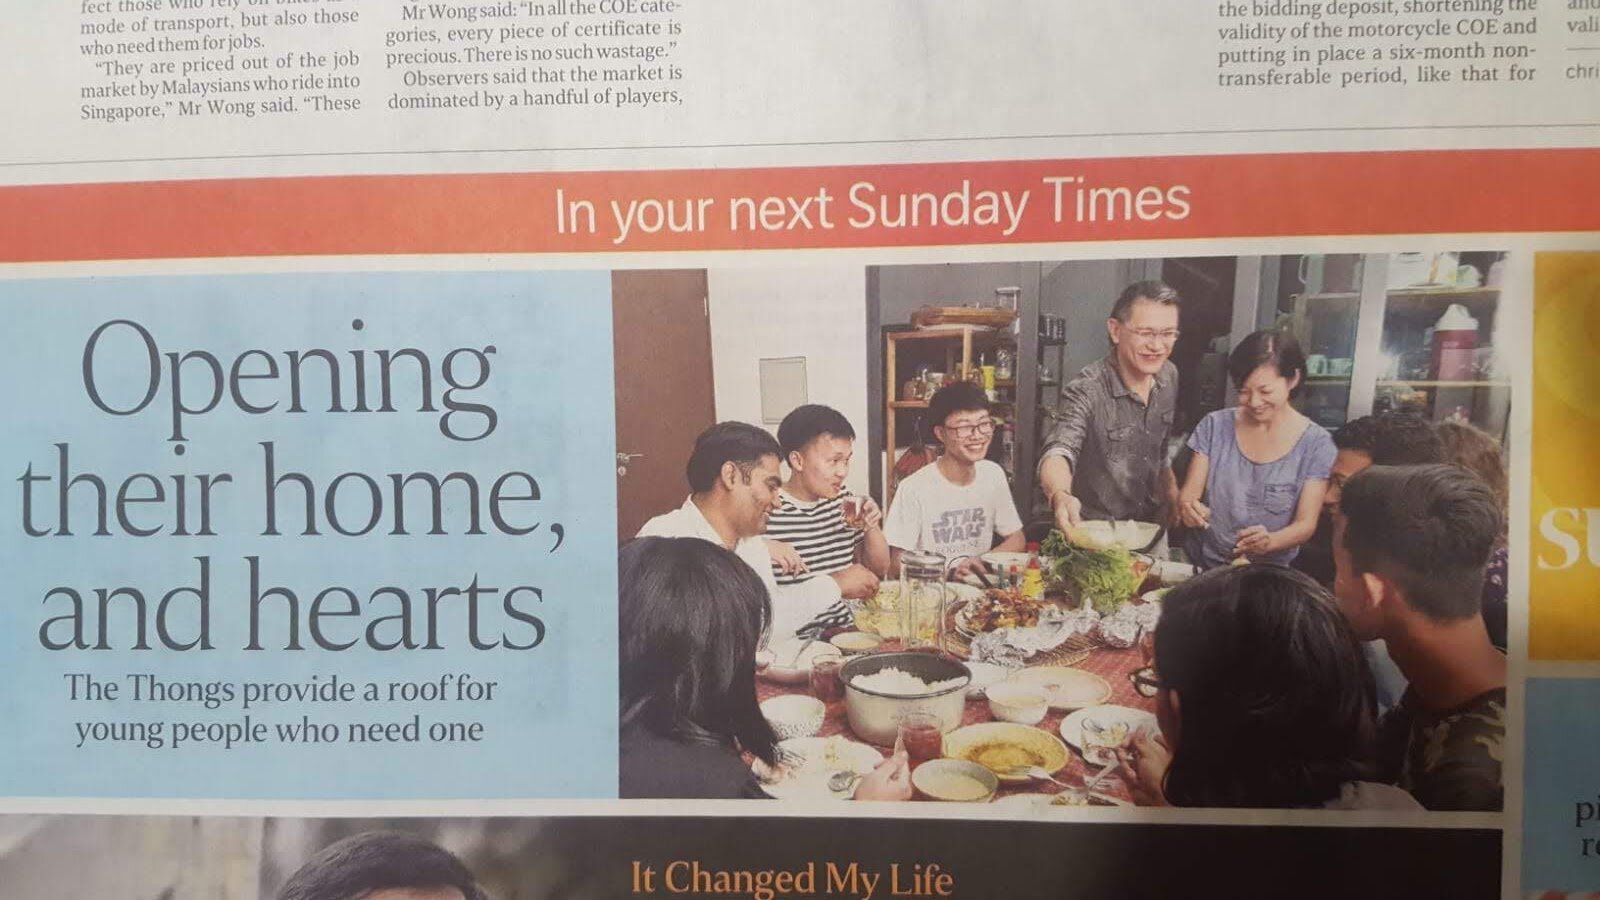 The Sunday Times - For Youths with nowhere to go, This couple is The Last Resort